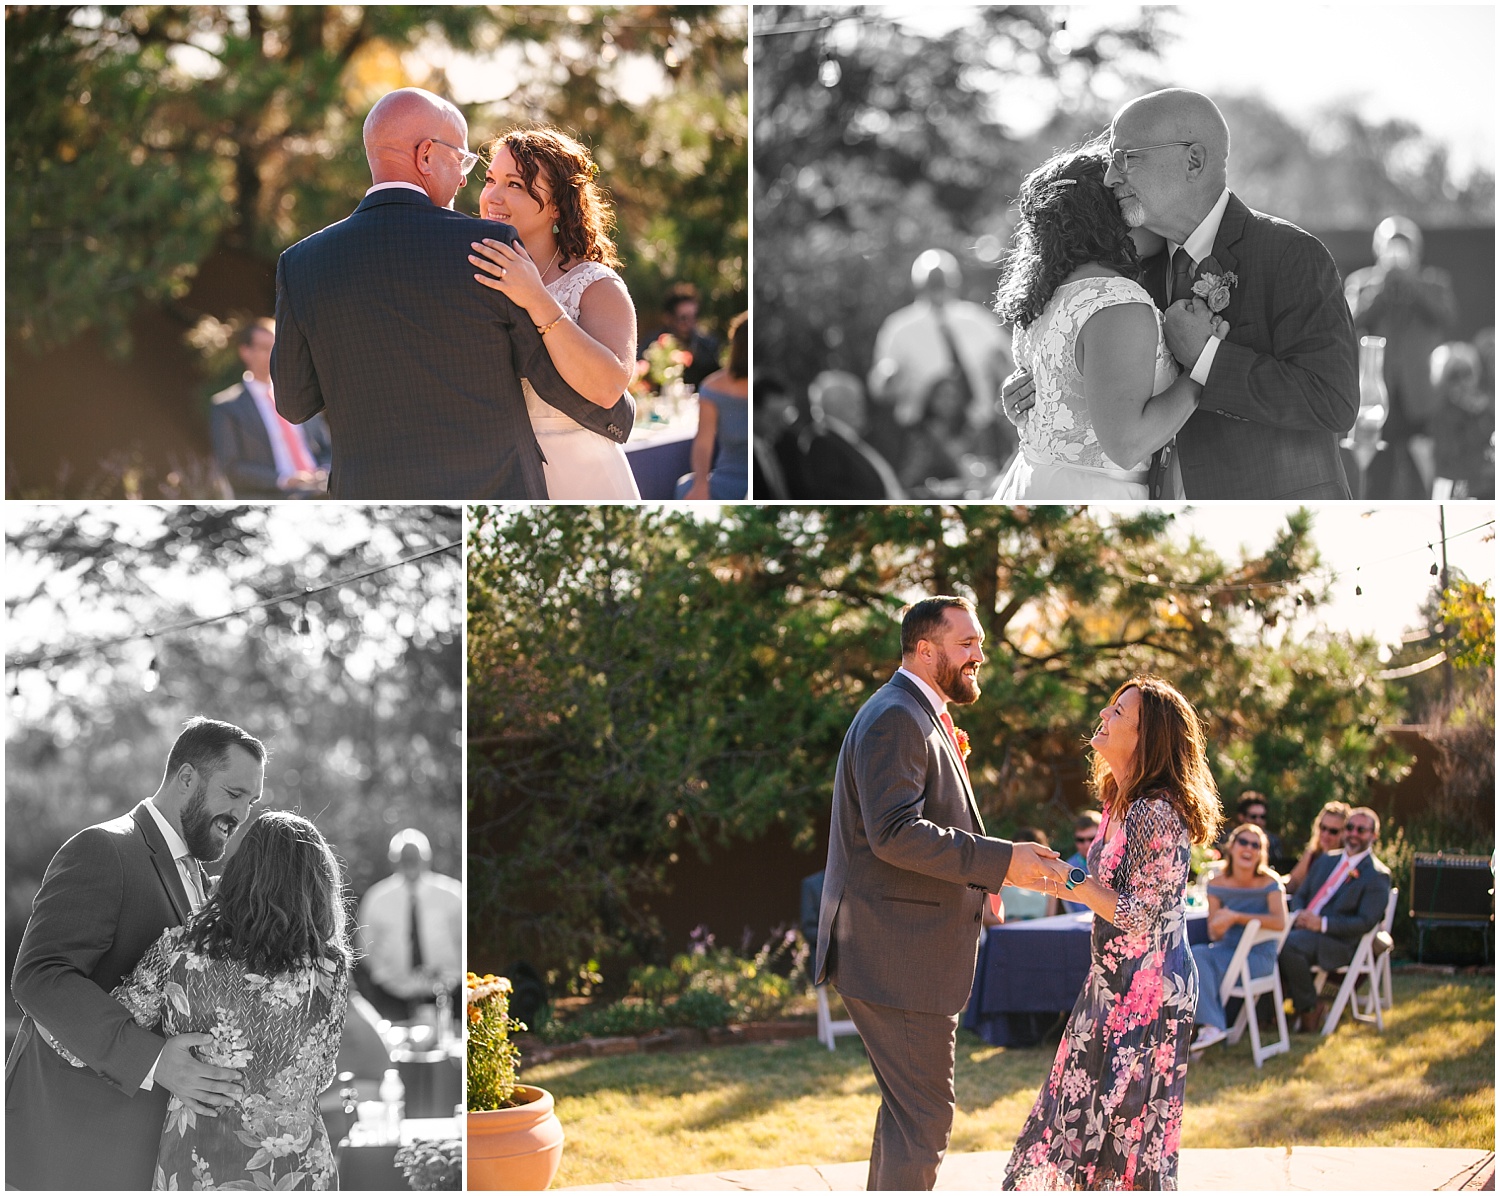 Bride and groom dance with their parents at their backyard wedding celebration